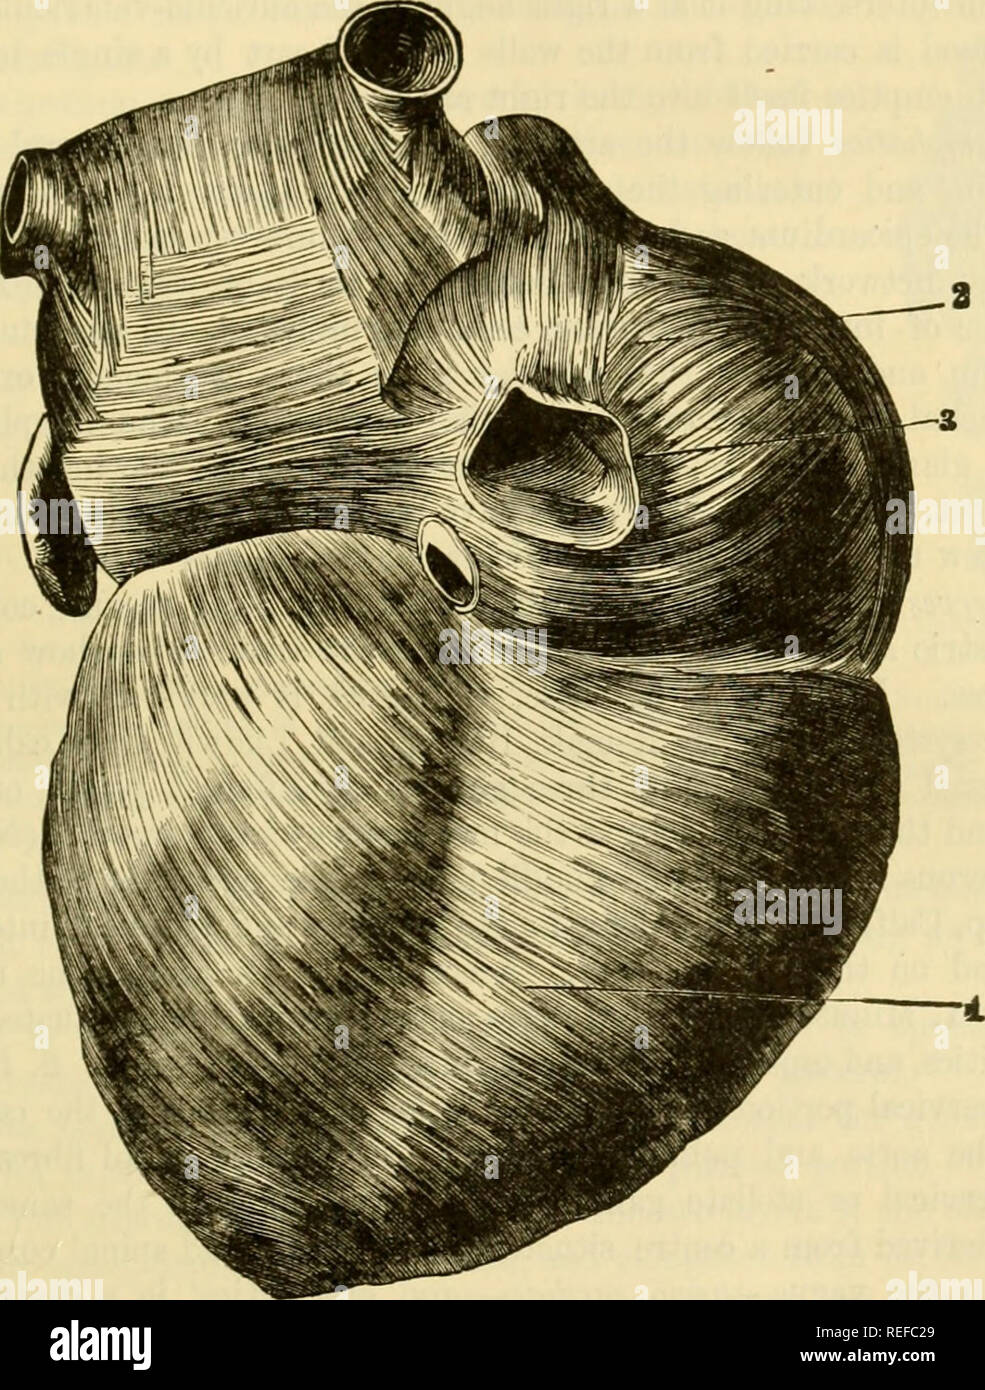 . The comparative anatomy of the domesticated animals. Horses; Veterinary anatomy. THE HEART. 59&amp; The unifive fibres constitute two thin bands—u right and left, caiTied from one auricle to the other. The proper fibres are divided into several fasciculi, some of which are arranfred in rings around the auriculo-ventricular opening ; others in interwoven loops; and others, again, in sphincters, which surround the entrance of the veins. These fibres are arranged in such a manner that, in contracting, they diminish the auricles by their superior and lateral planes and extremities, and propel th Stock Photo